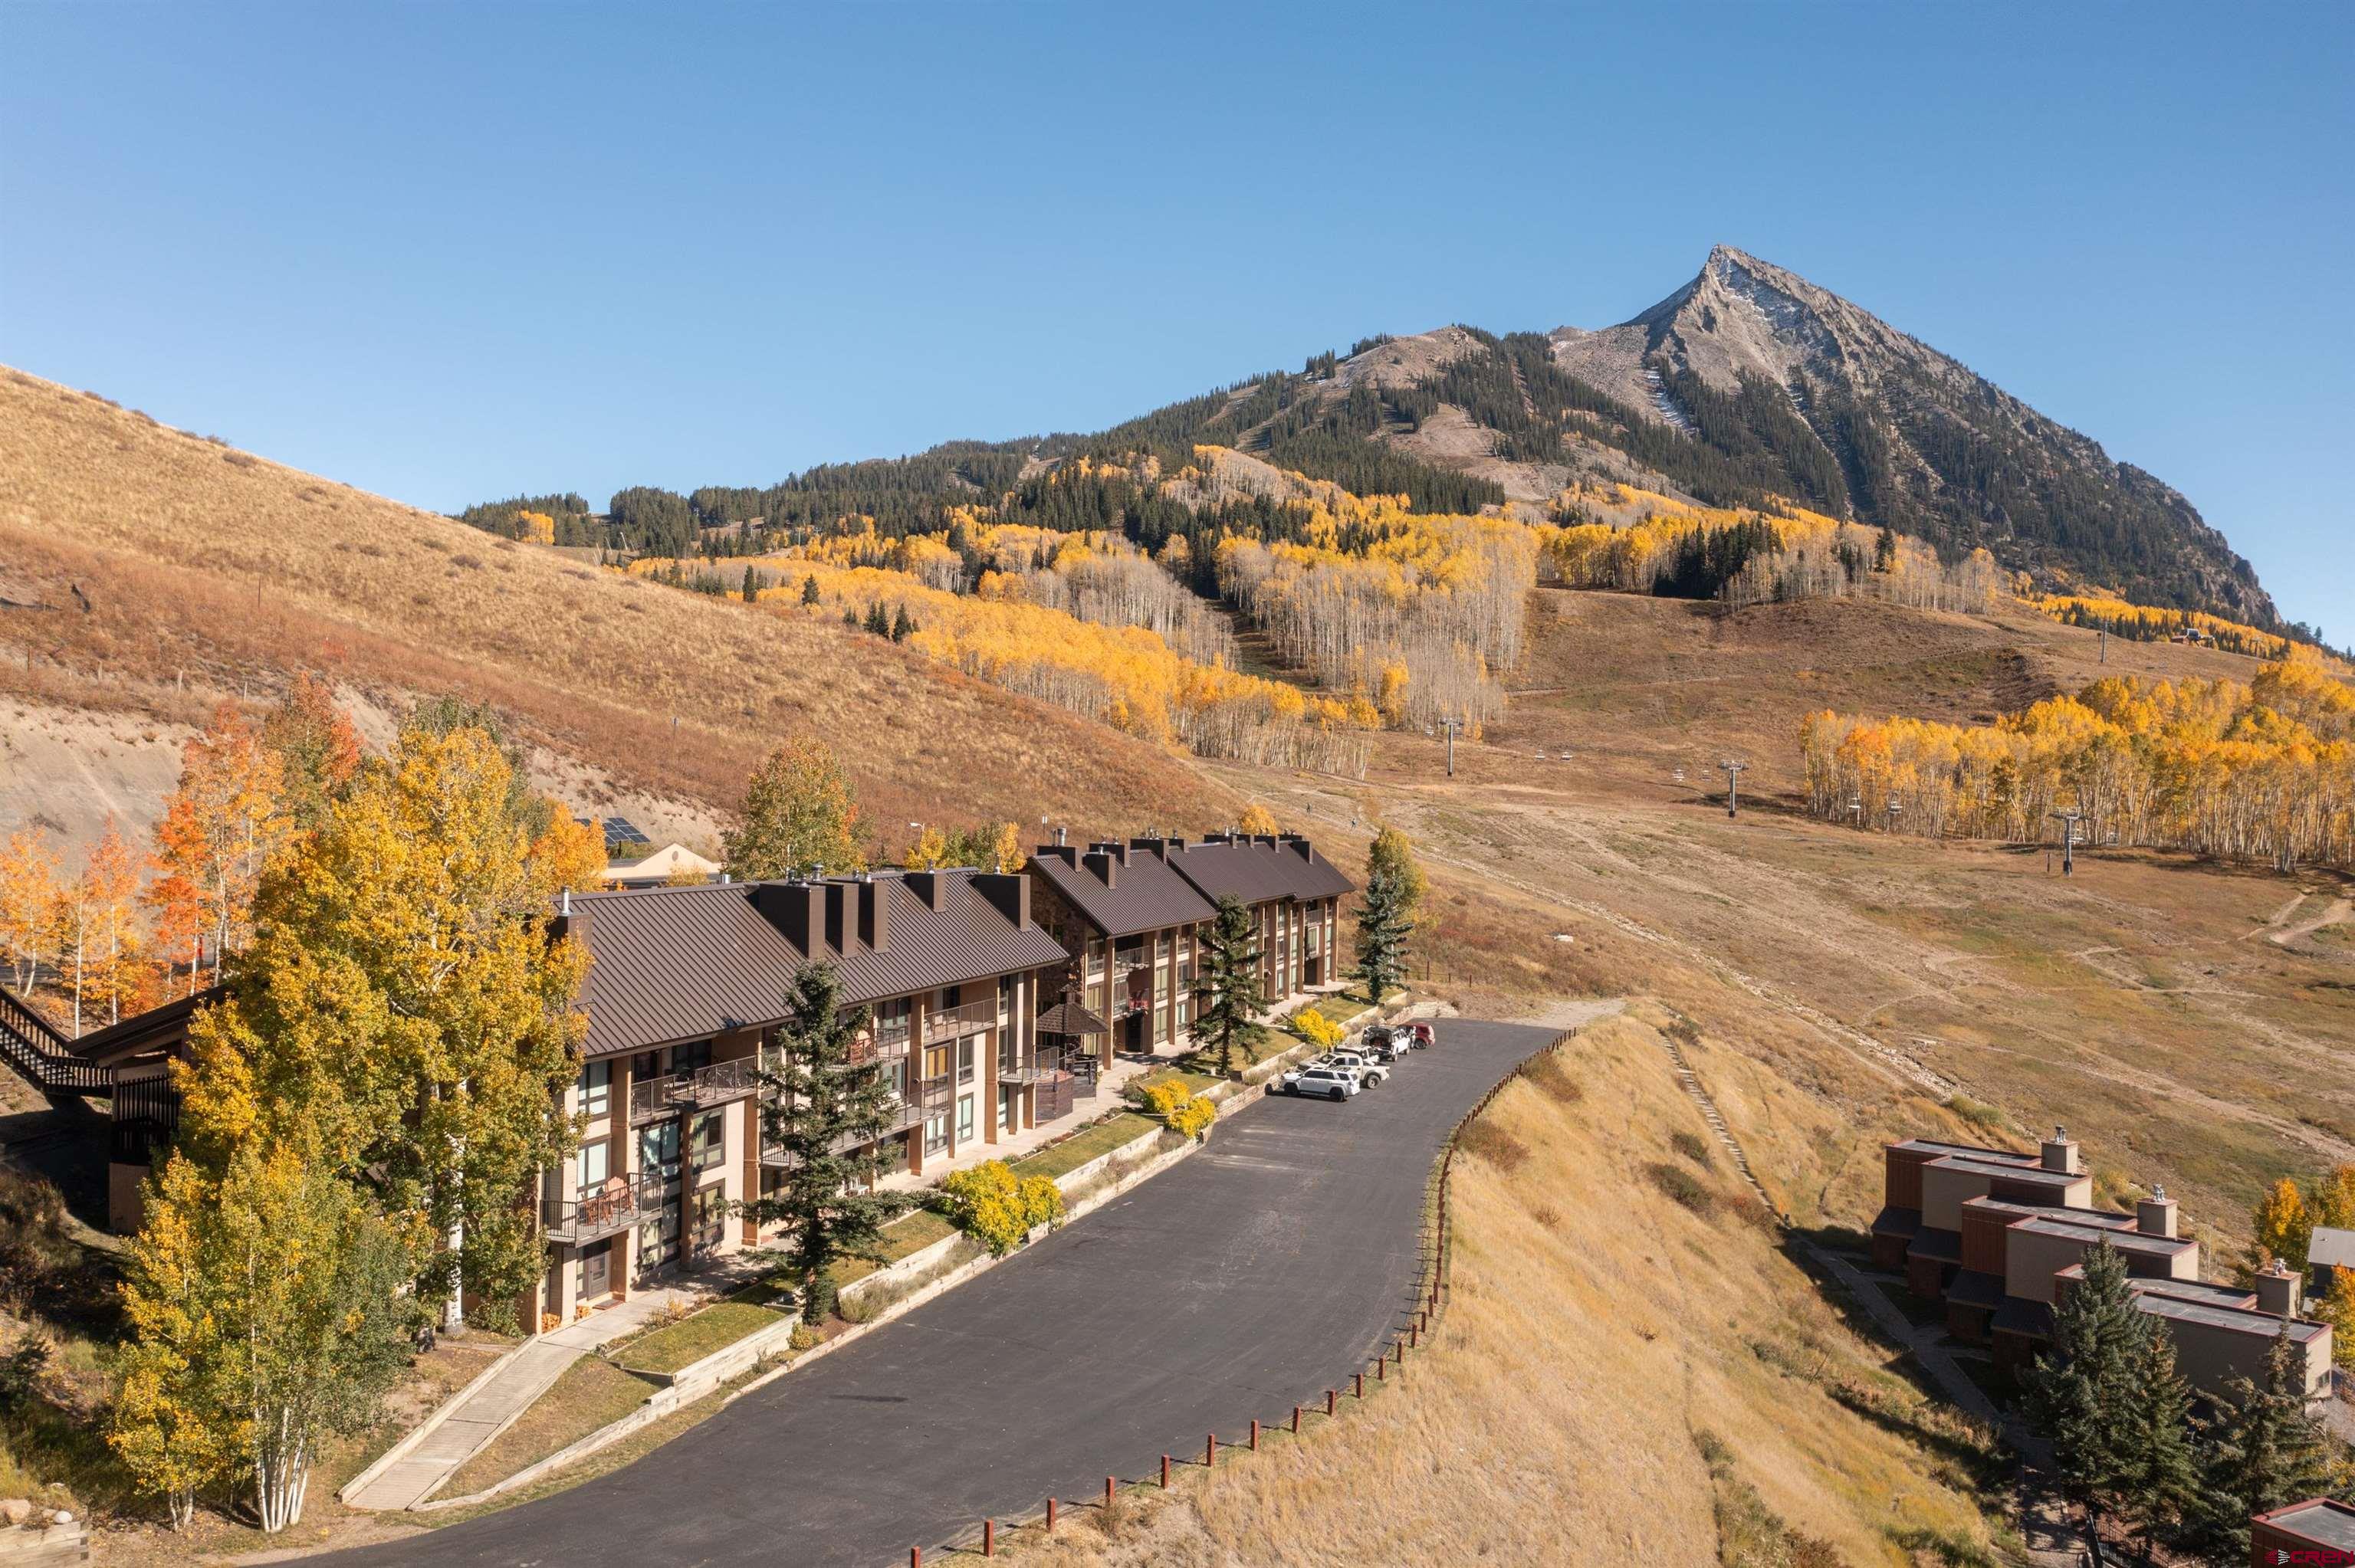 51 Whetstone Road, Mt. Crested Butte, CO 